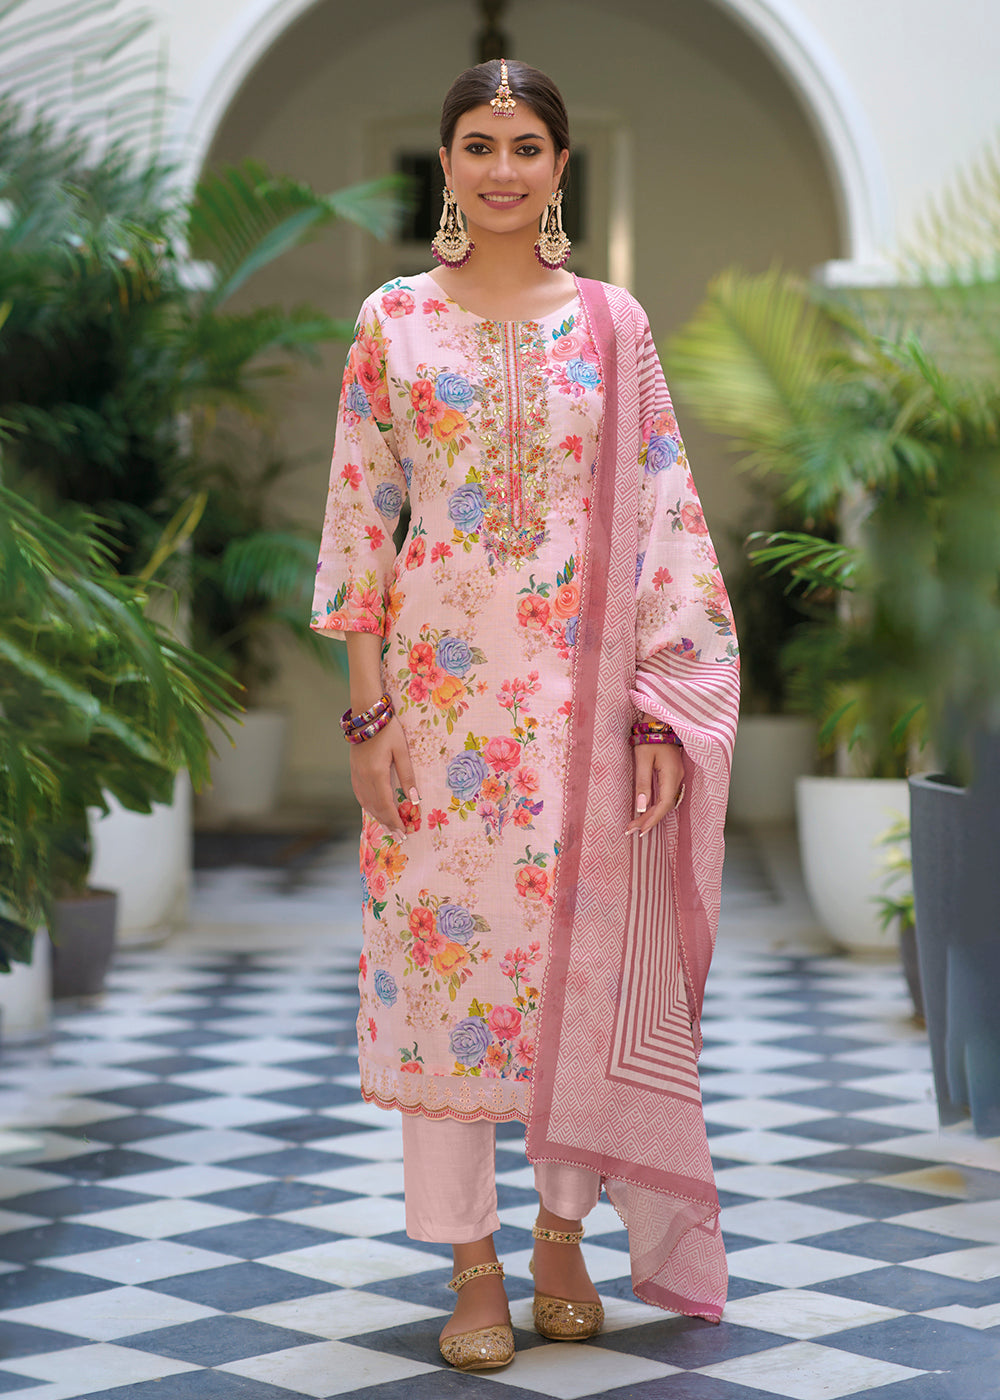 Buy Now Gota Patti Embroidered Pink Lilen Ethnic Salwar Suit Online in USA, UK, Canada, Germany, Australia & Worldwide at Empress Clothing.